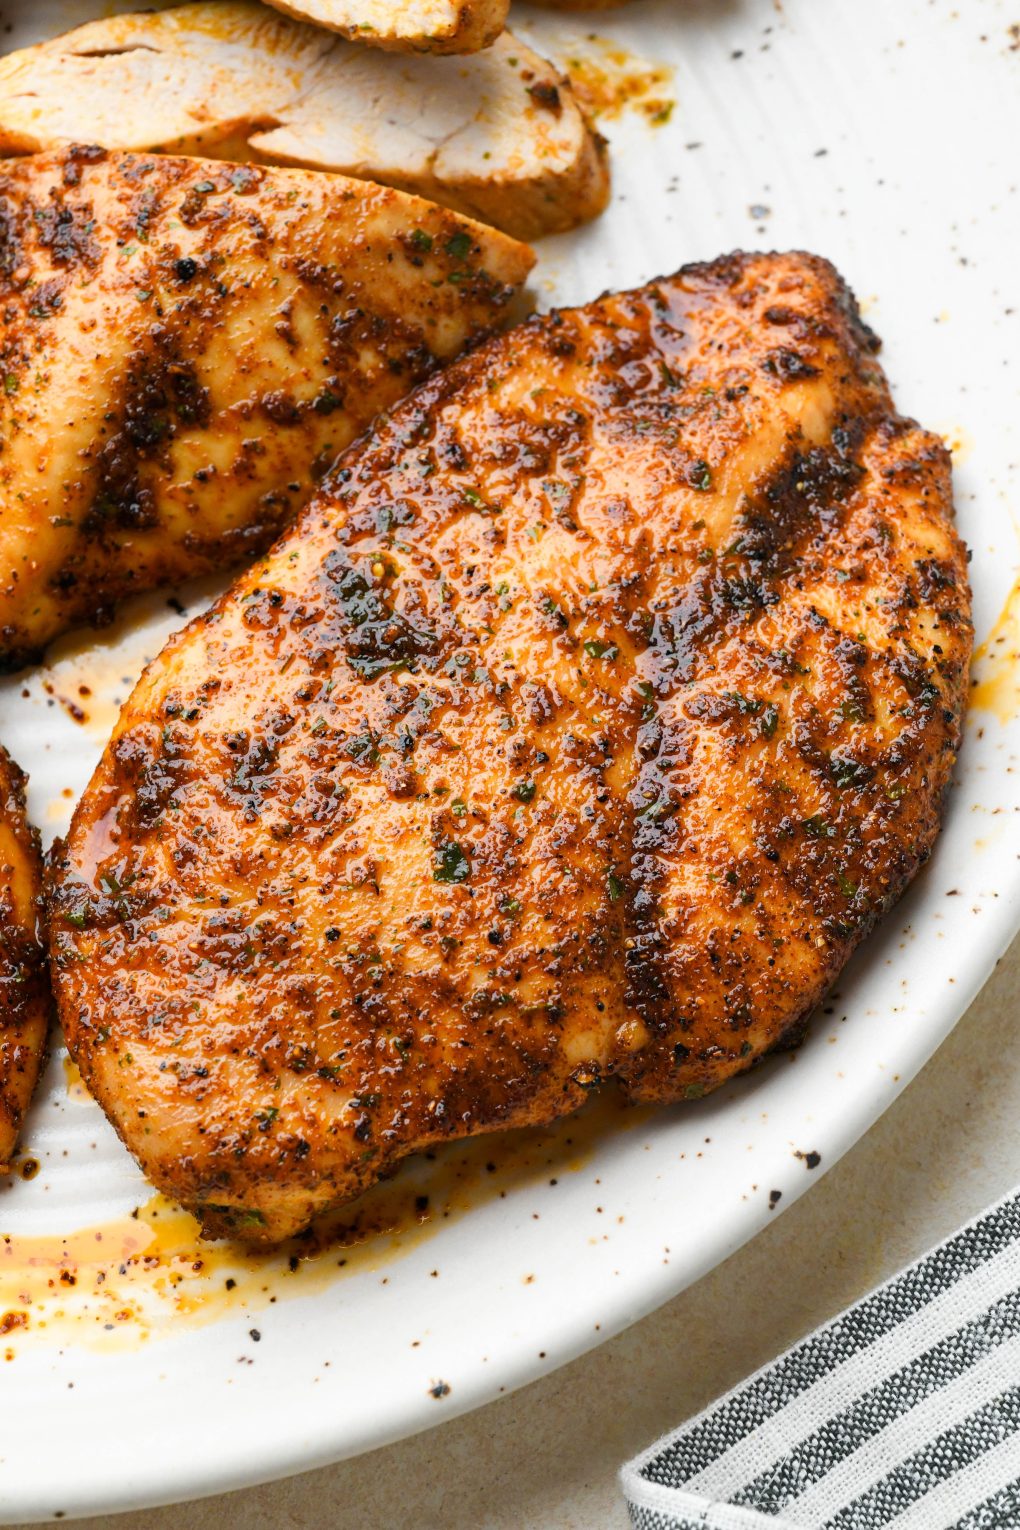 Close up of a perfectly cooked baked chicken breast on a light colored platter.